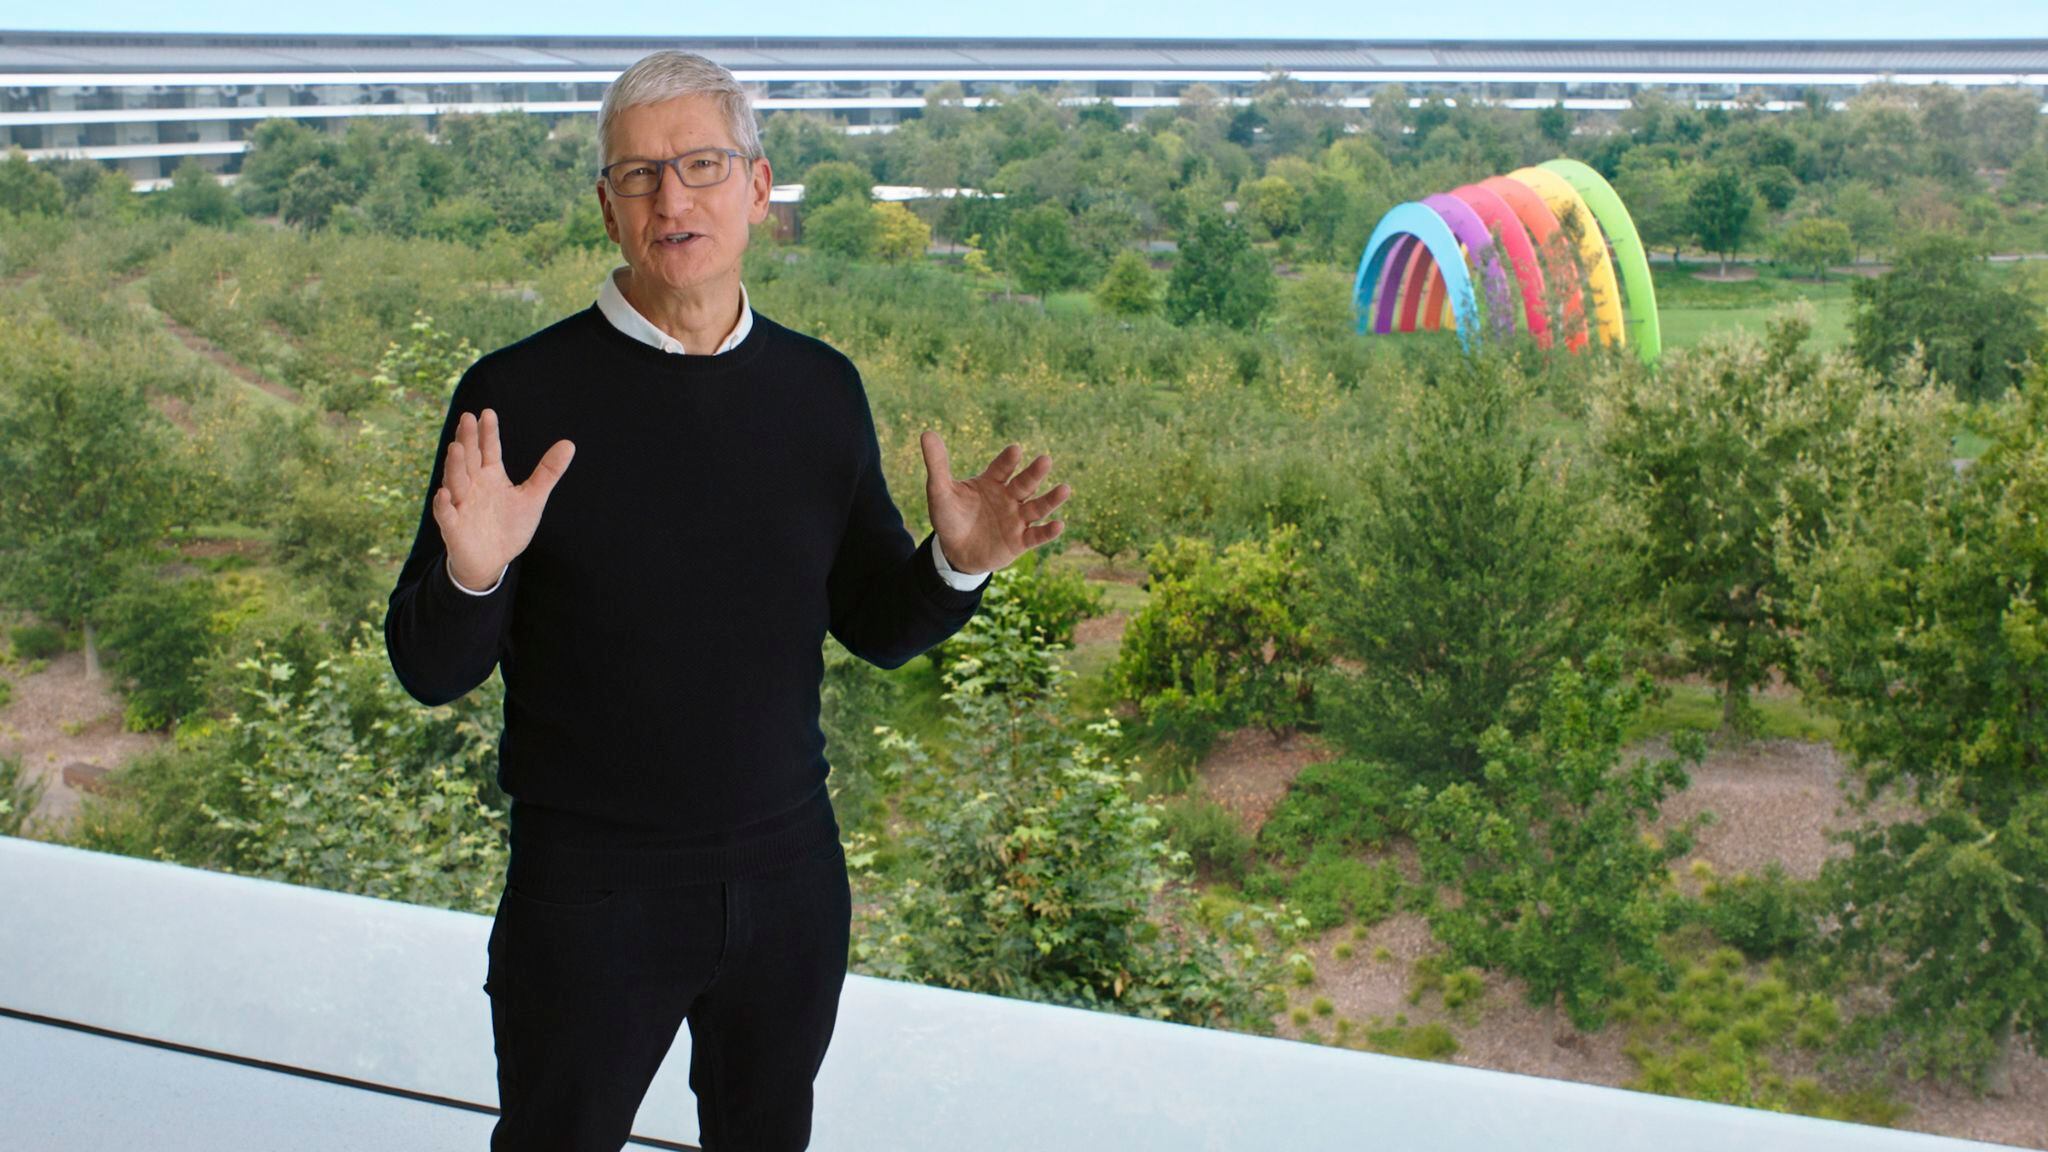 A handout still image from the keynote video released by Apple inc. shows Apple CEO Tim Cook kicks off a special event at Apple Park in Cupertino, California, on September 15, 2020. (Photo by Handout / Apple Inc. / AFP) / RESTRICTED TO EDITORIAL USE - MANDATORY CREDIT 